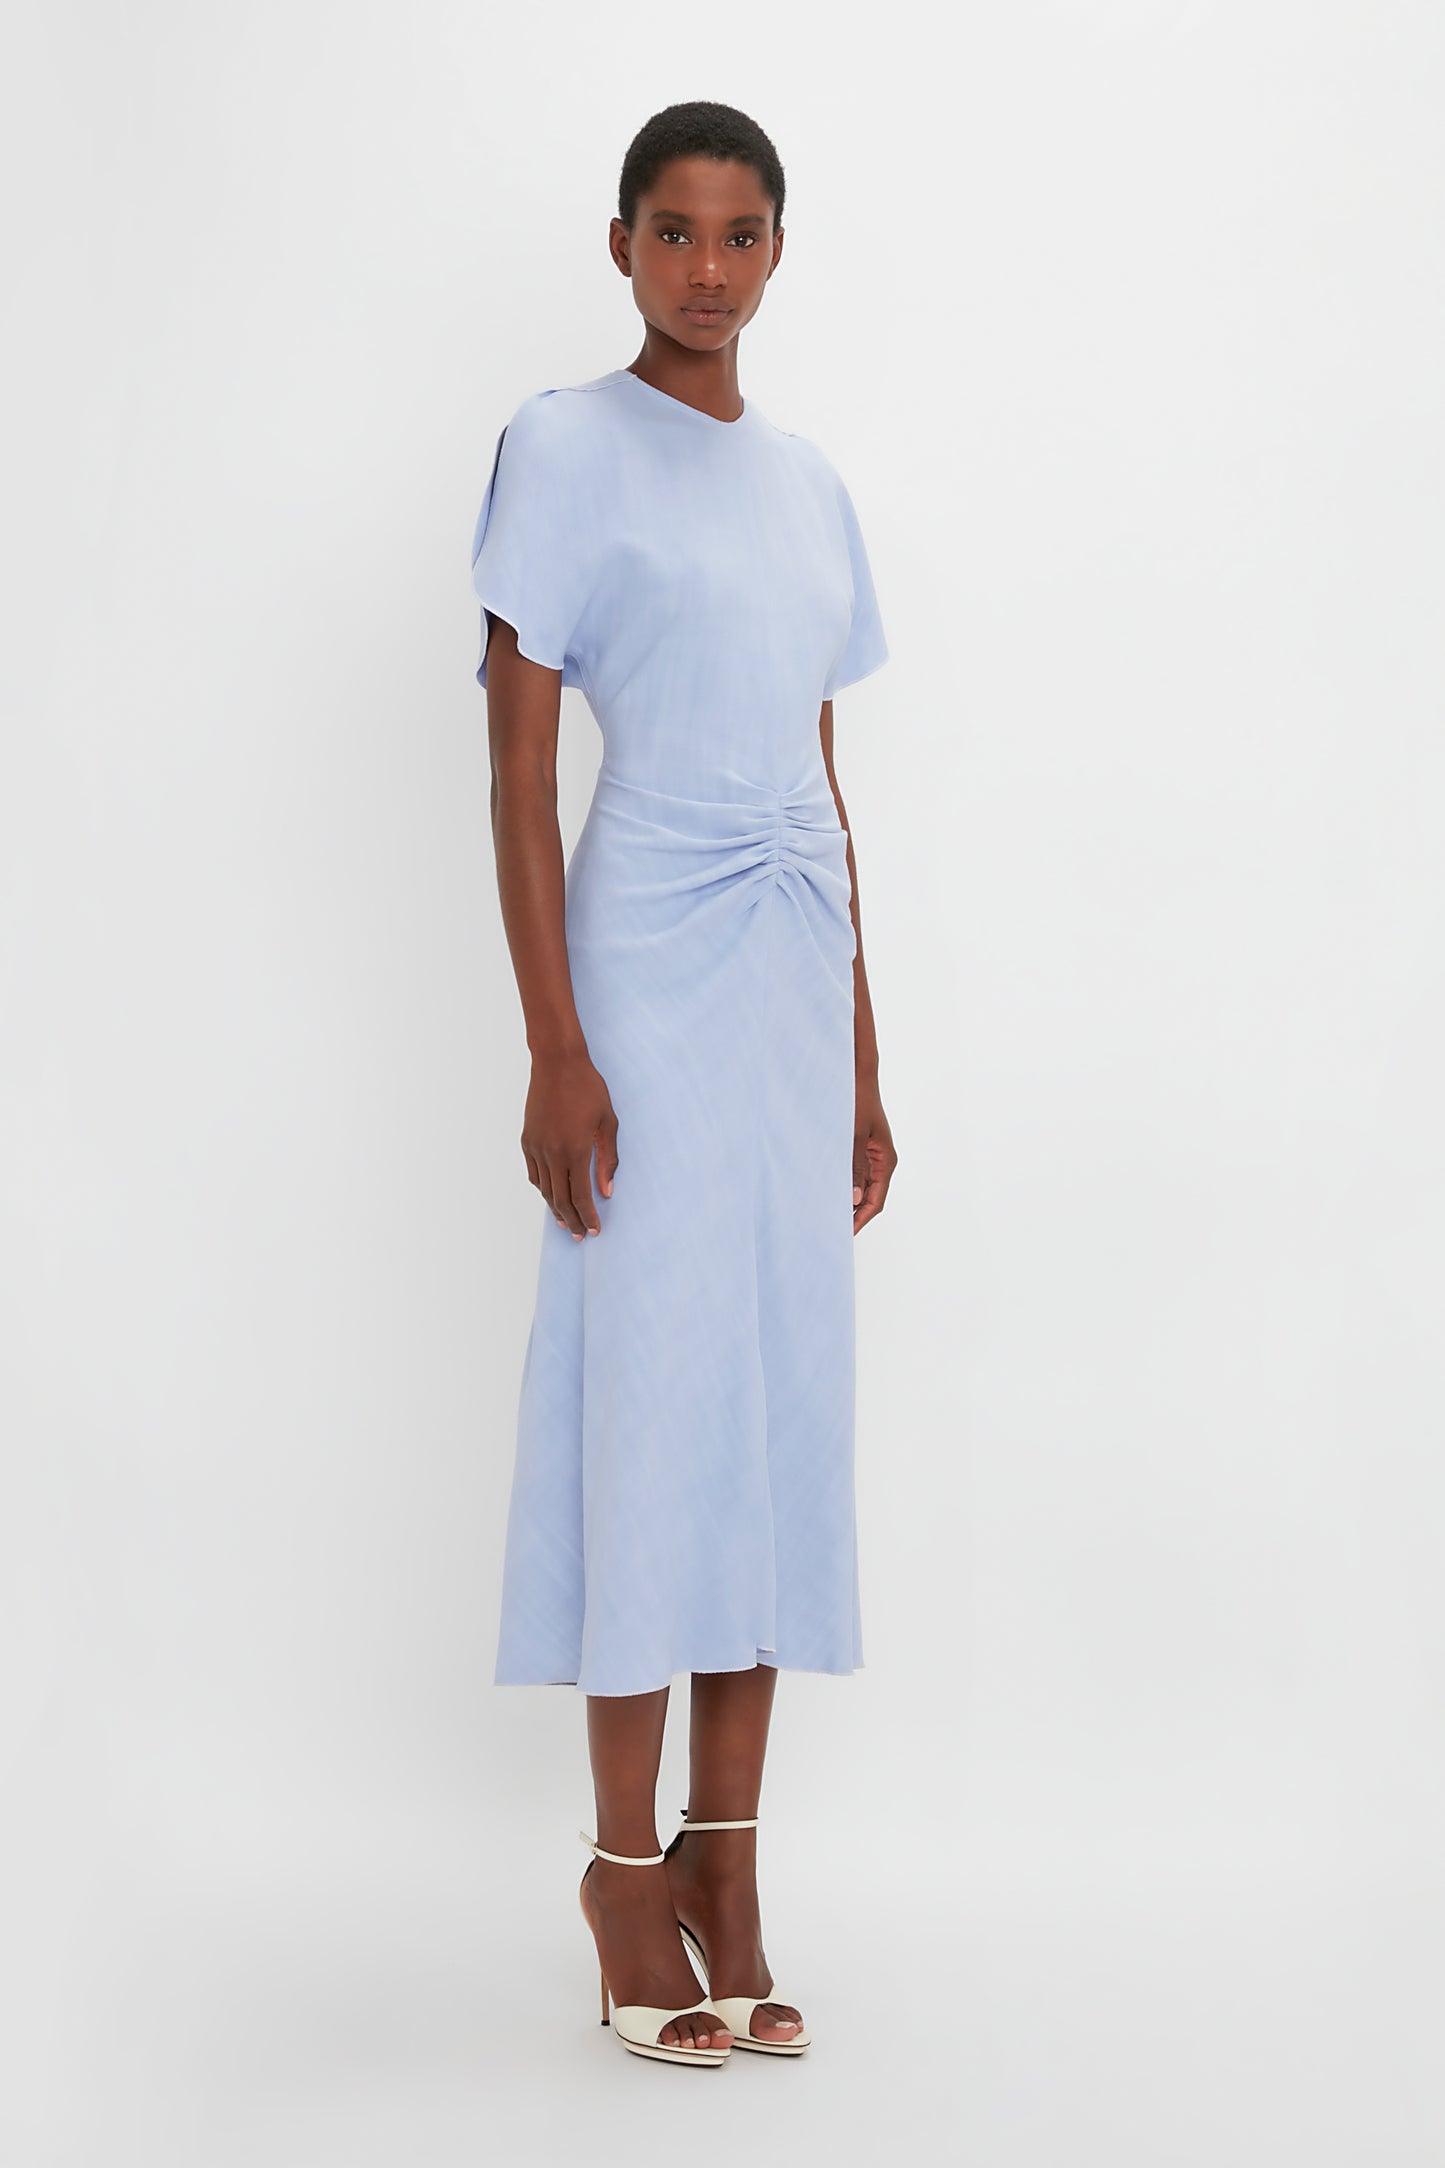 A black woman modeling a Victoria Beckham Gathered Waist Midi Dress In Frost, paired with white pointy toe stiletto sandals, standing against a white background.